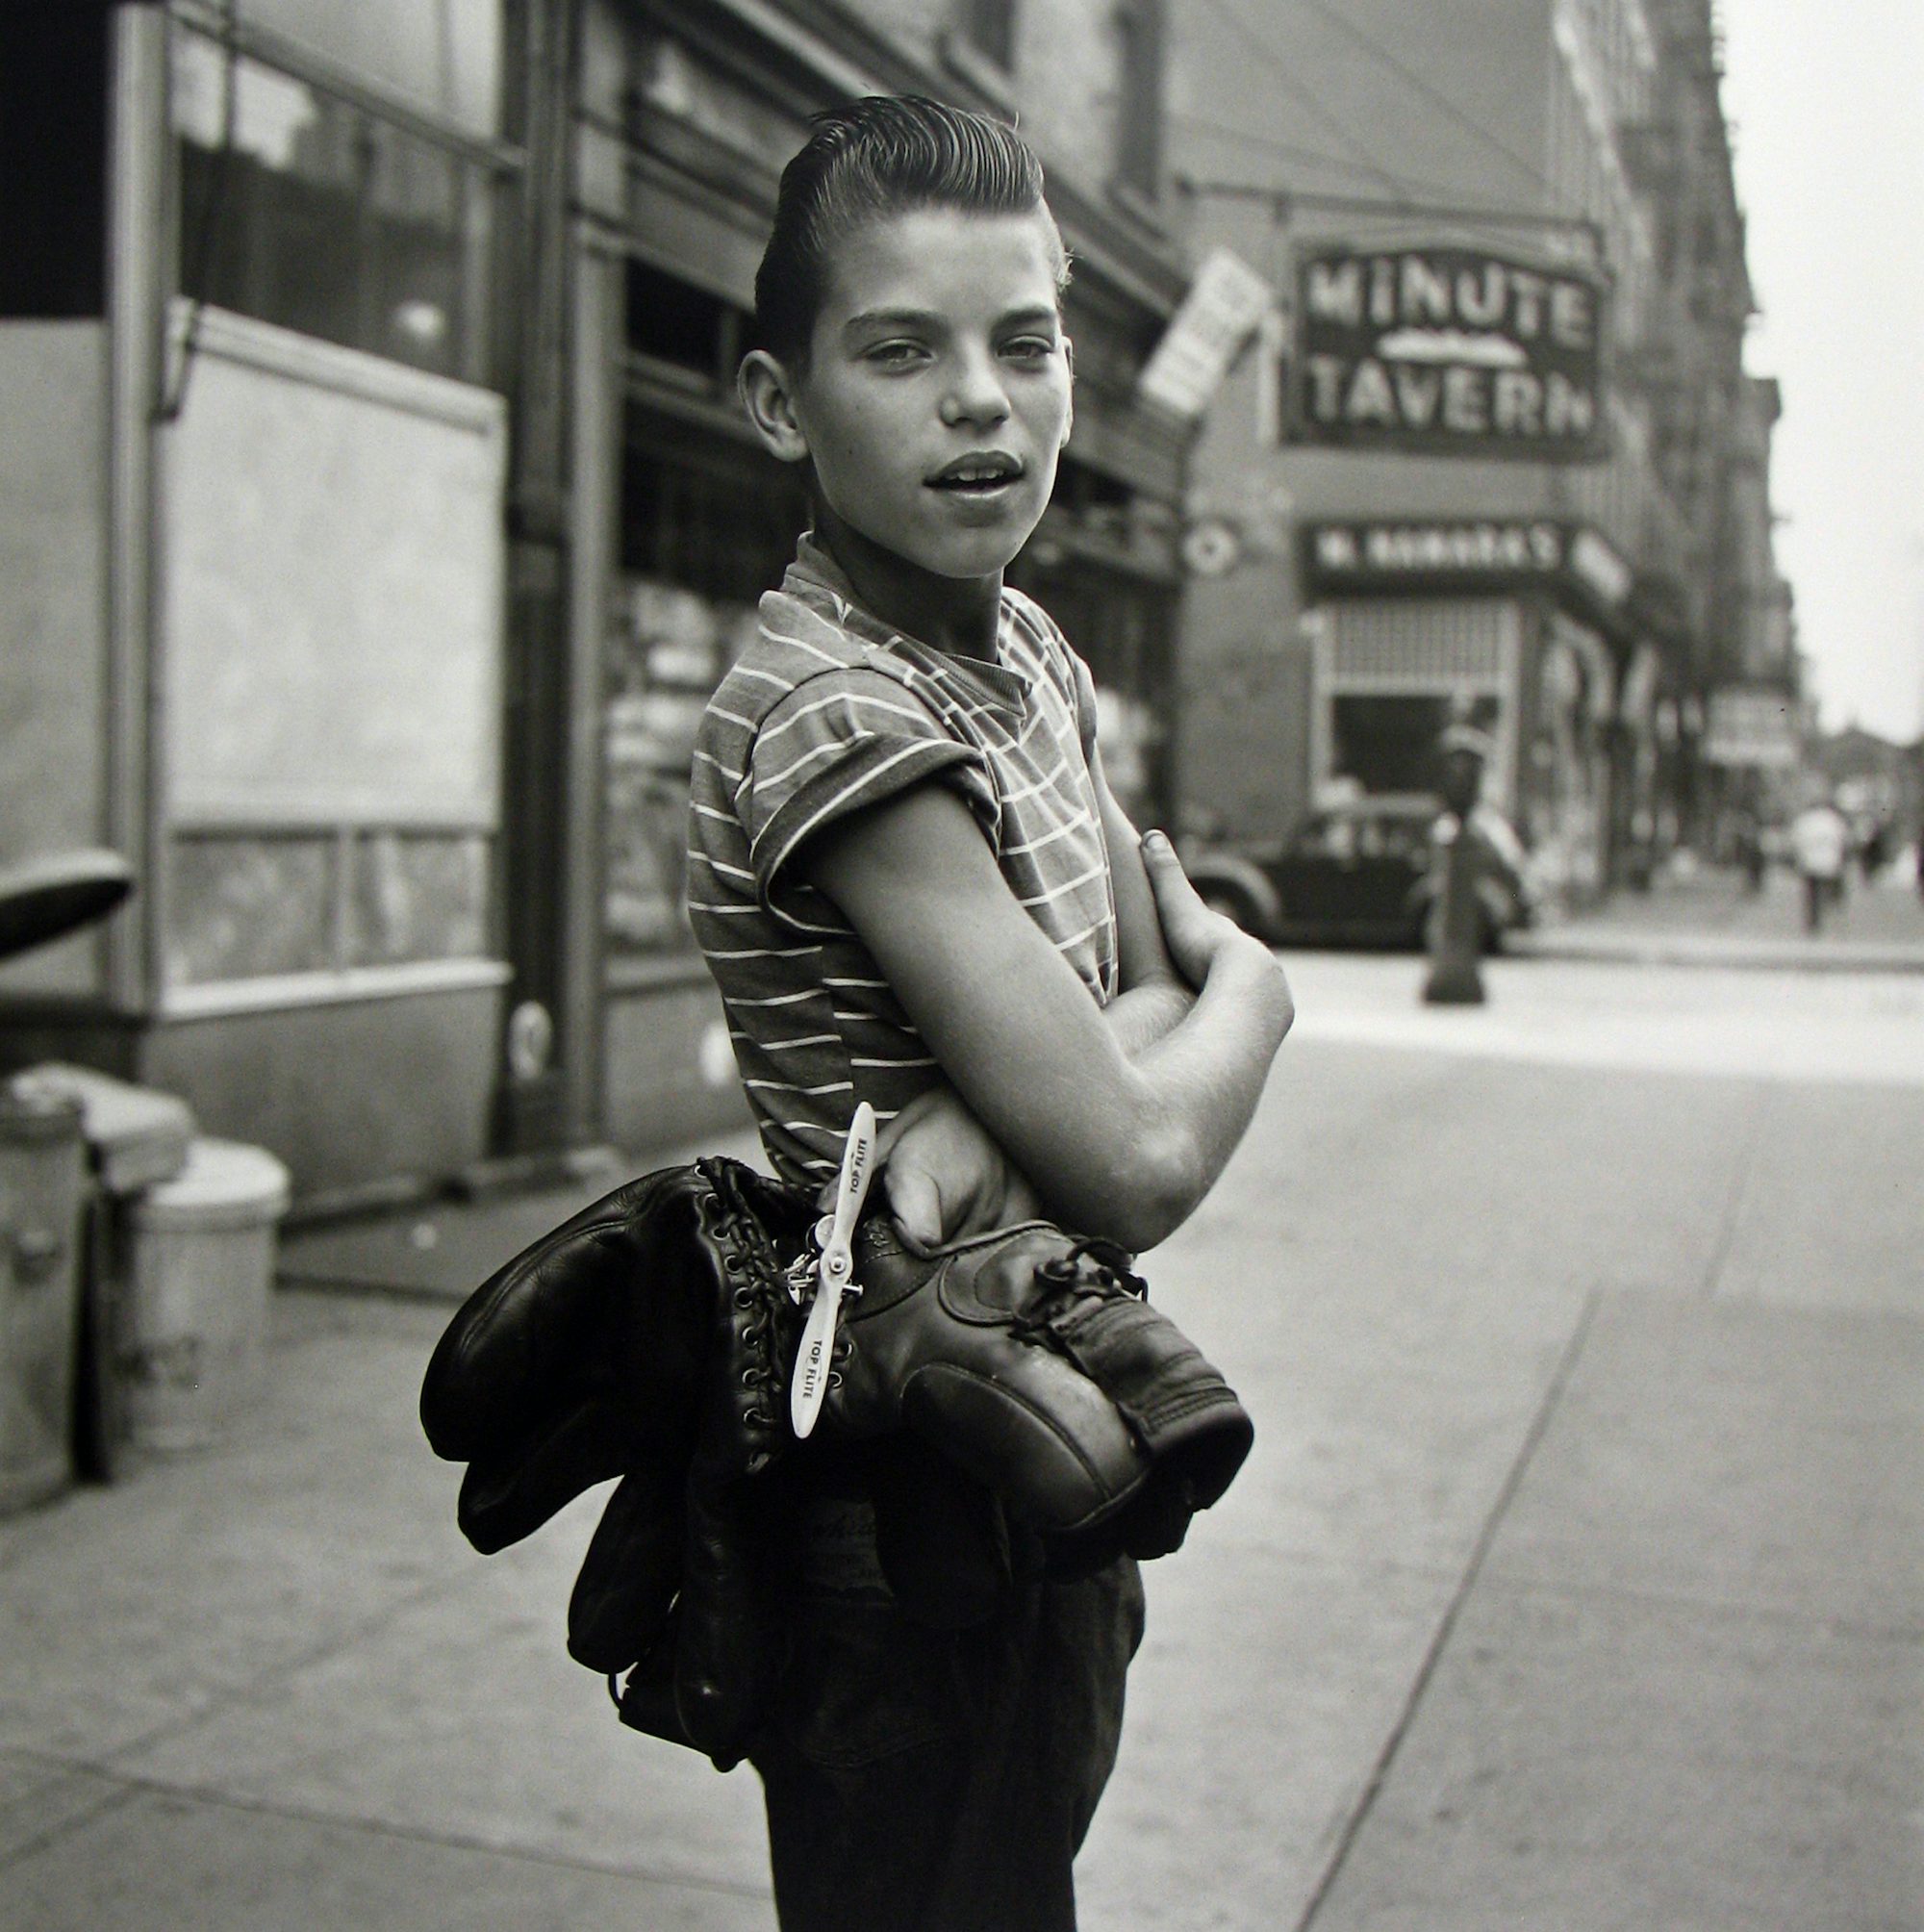 Vivian Maier, New York, September 3, 1954 Copyright Estate of Vivian Maier, Courtesy of Maloof Collection and Howard Greenberg Gallery, NY